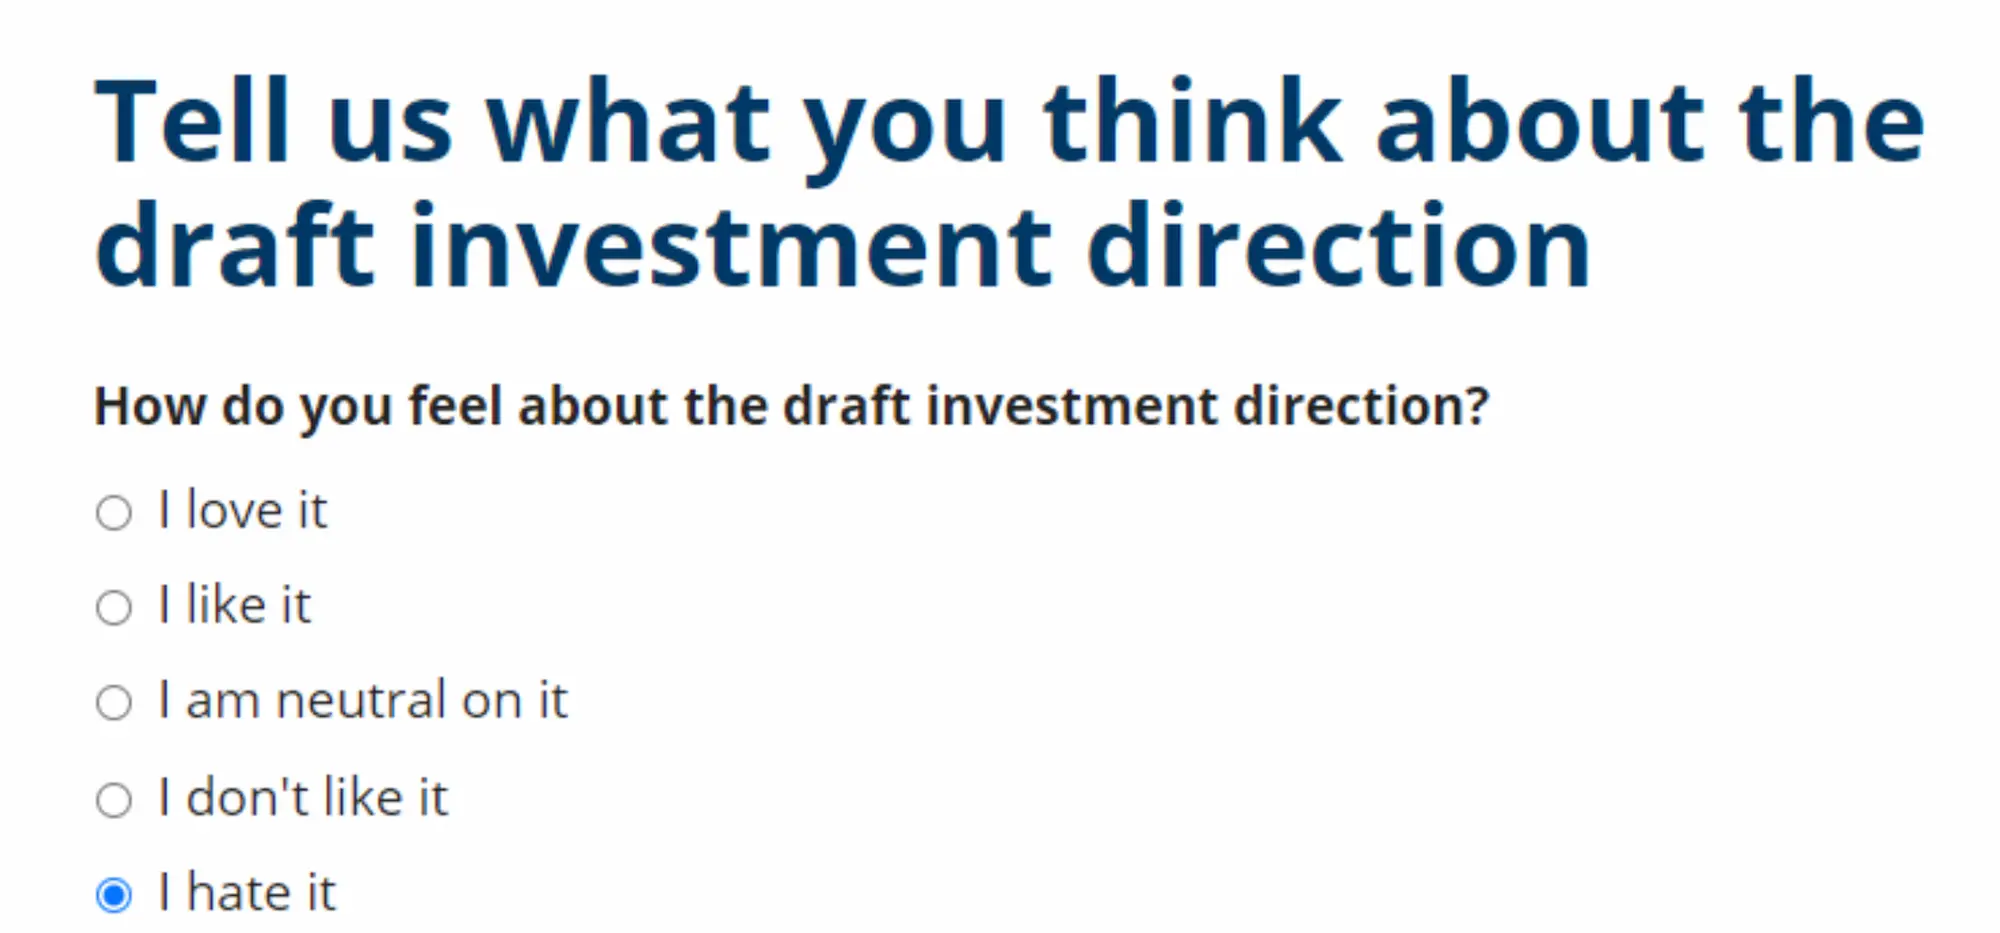 poll asking "tell us what you think about the draft investment direction"